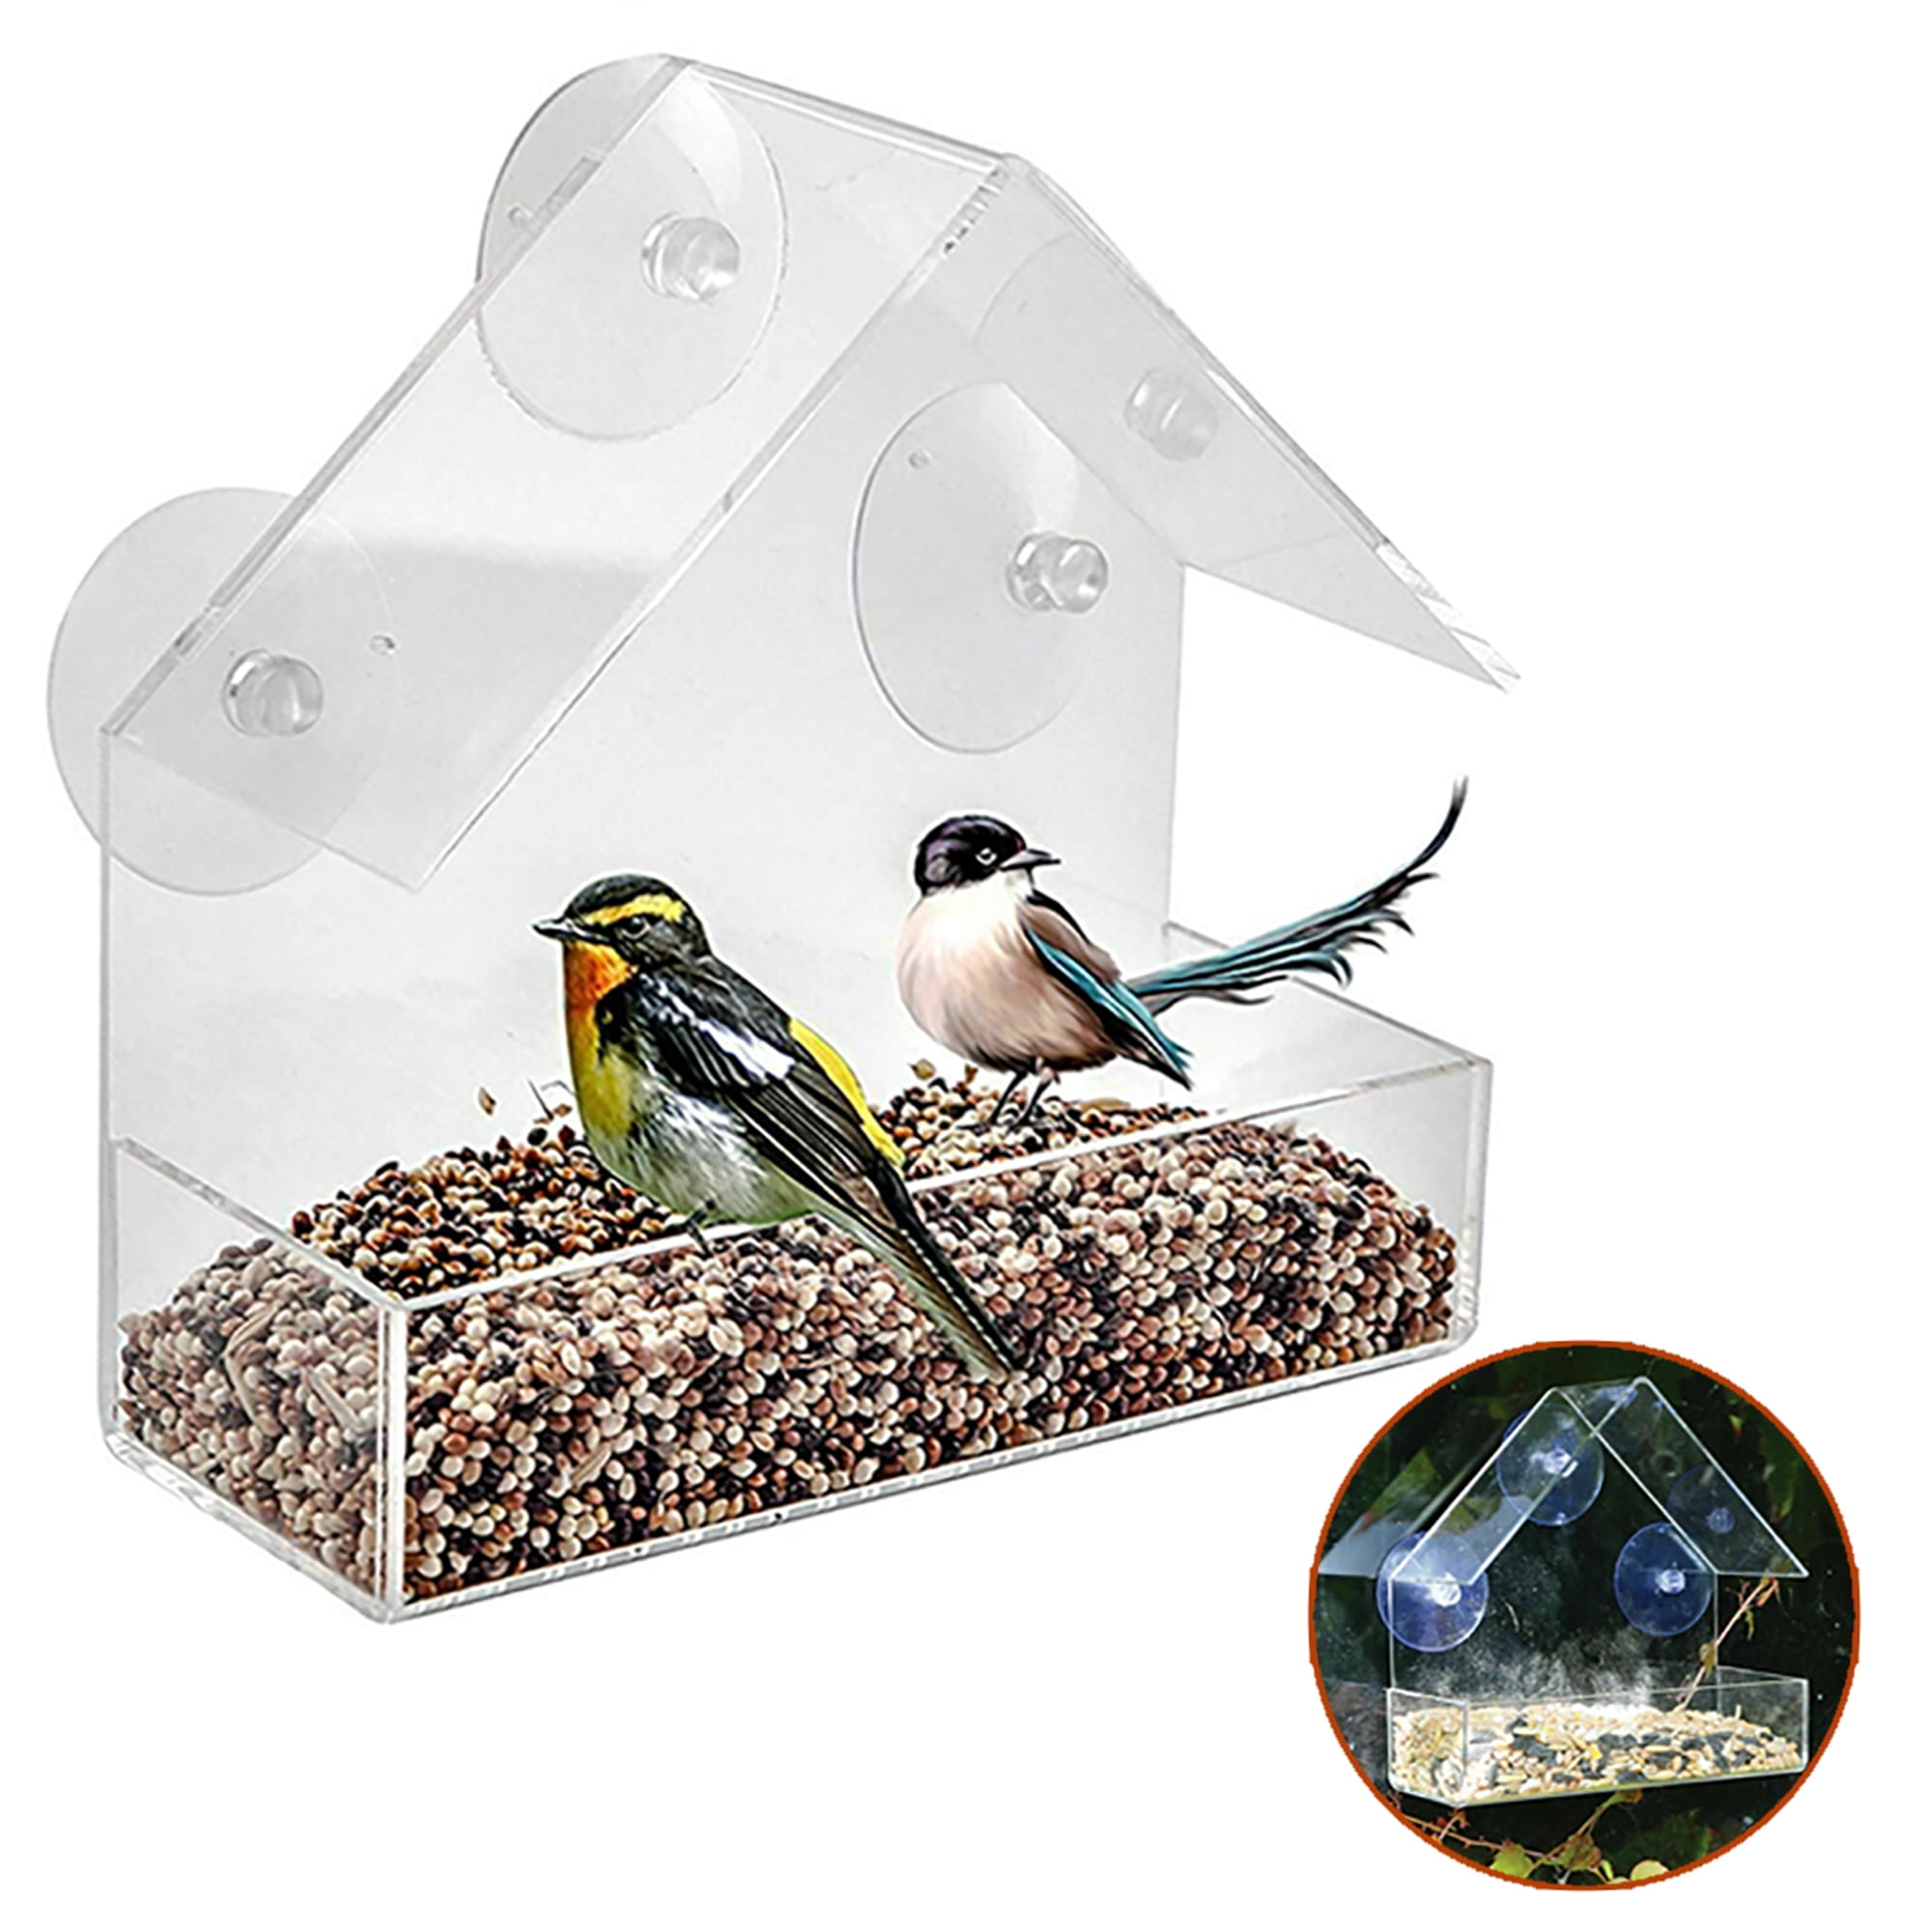 See birds up close FREE SHIPPING Window Bird Feeder: large durable washable 